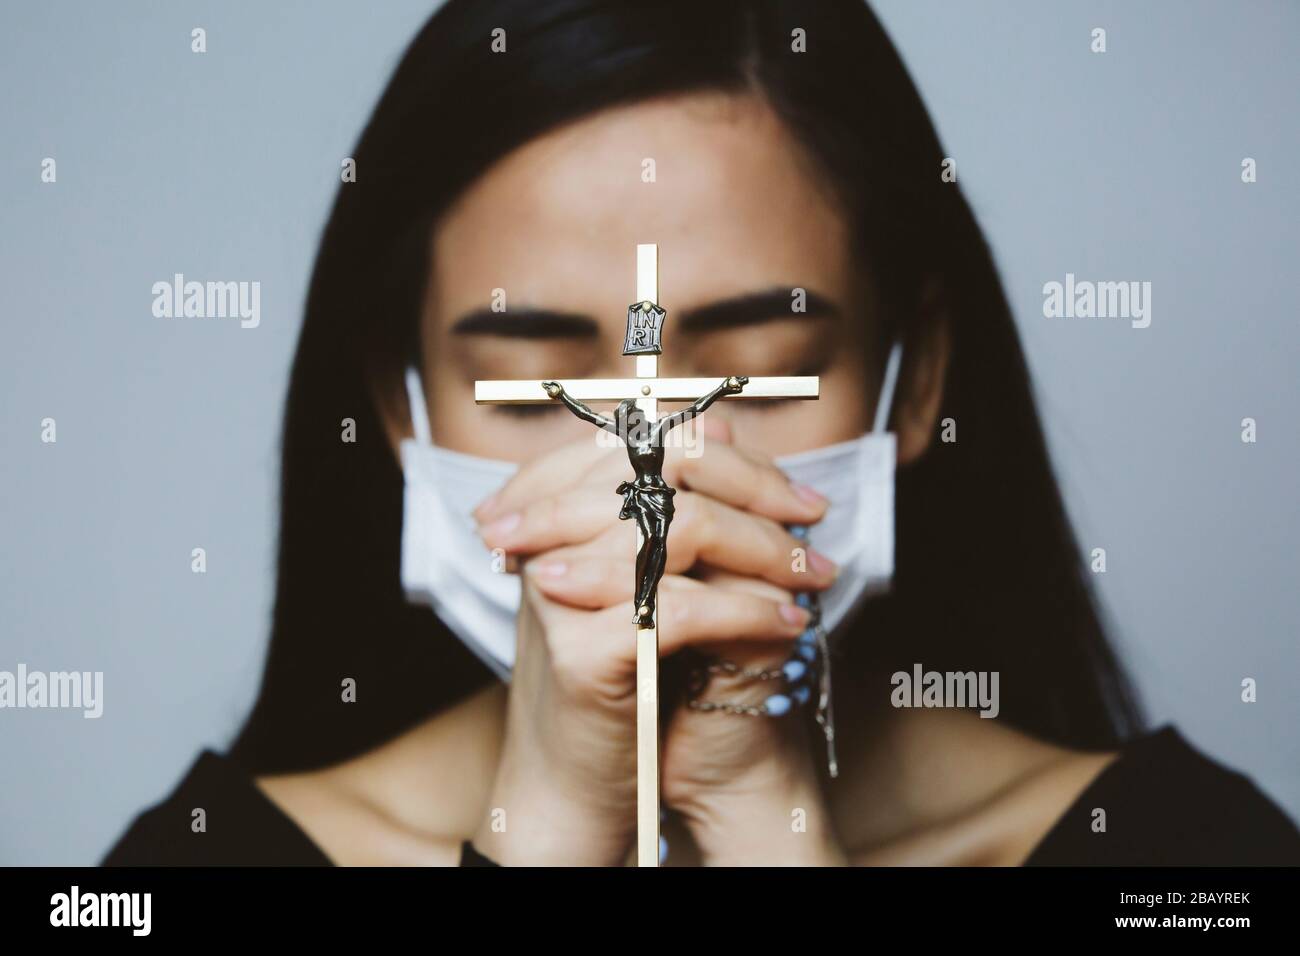 Woman wearing surgical mask praying with rosary. Christian religion hope concept. Stock Photo